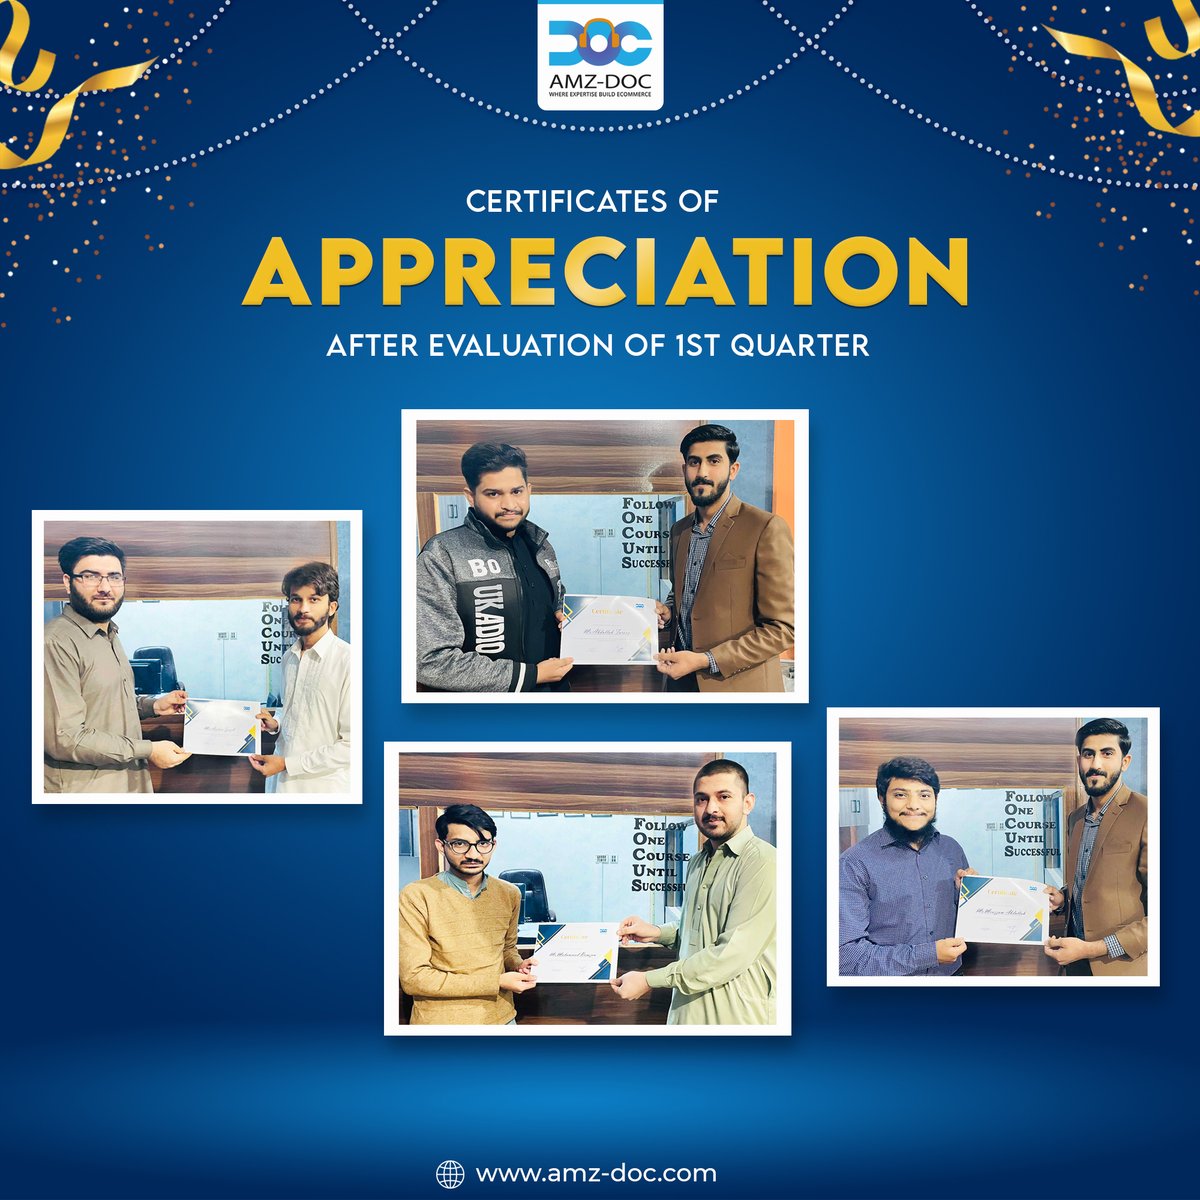 🎉 Congratulations to all the hard-working individuals at AMZ DOC, We're proud to award certificates of appreciation to those who have gone above and beyond, showing dedication and commitment to our company's success.  🙌 #AMZDOC #CertificateOfAppreciation #HardWorkPaysOff